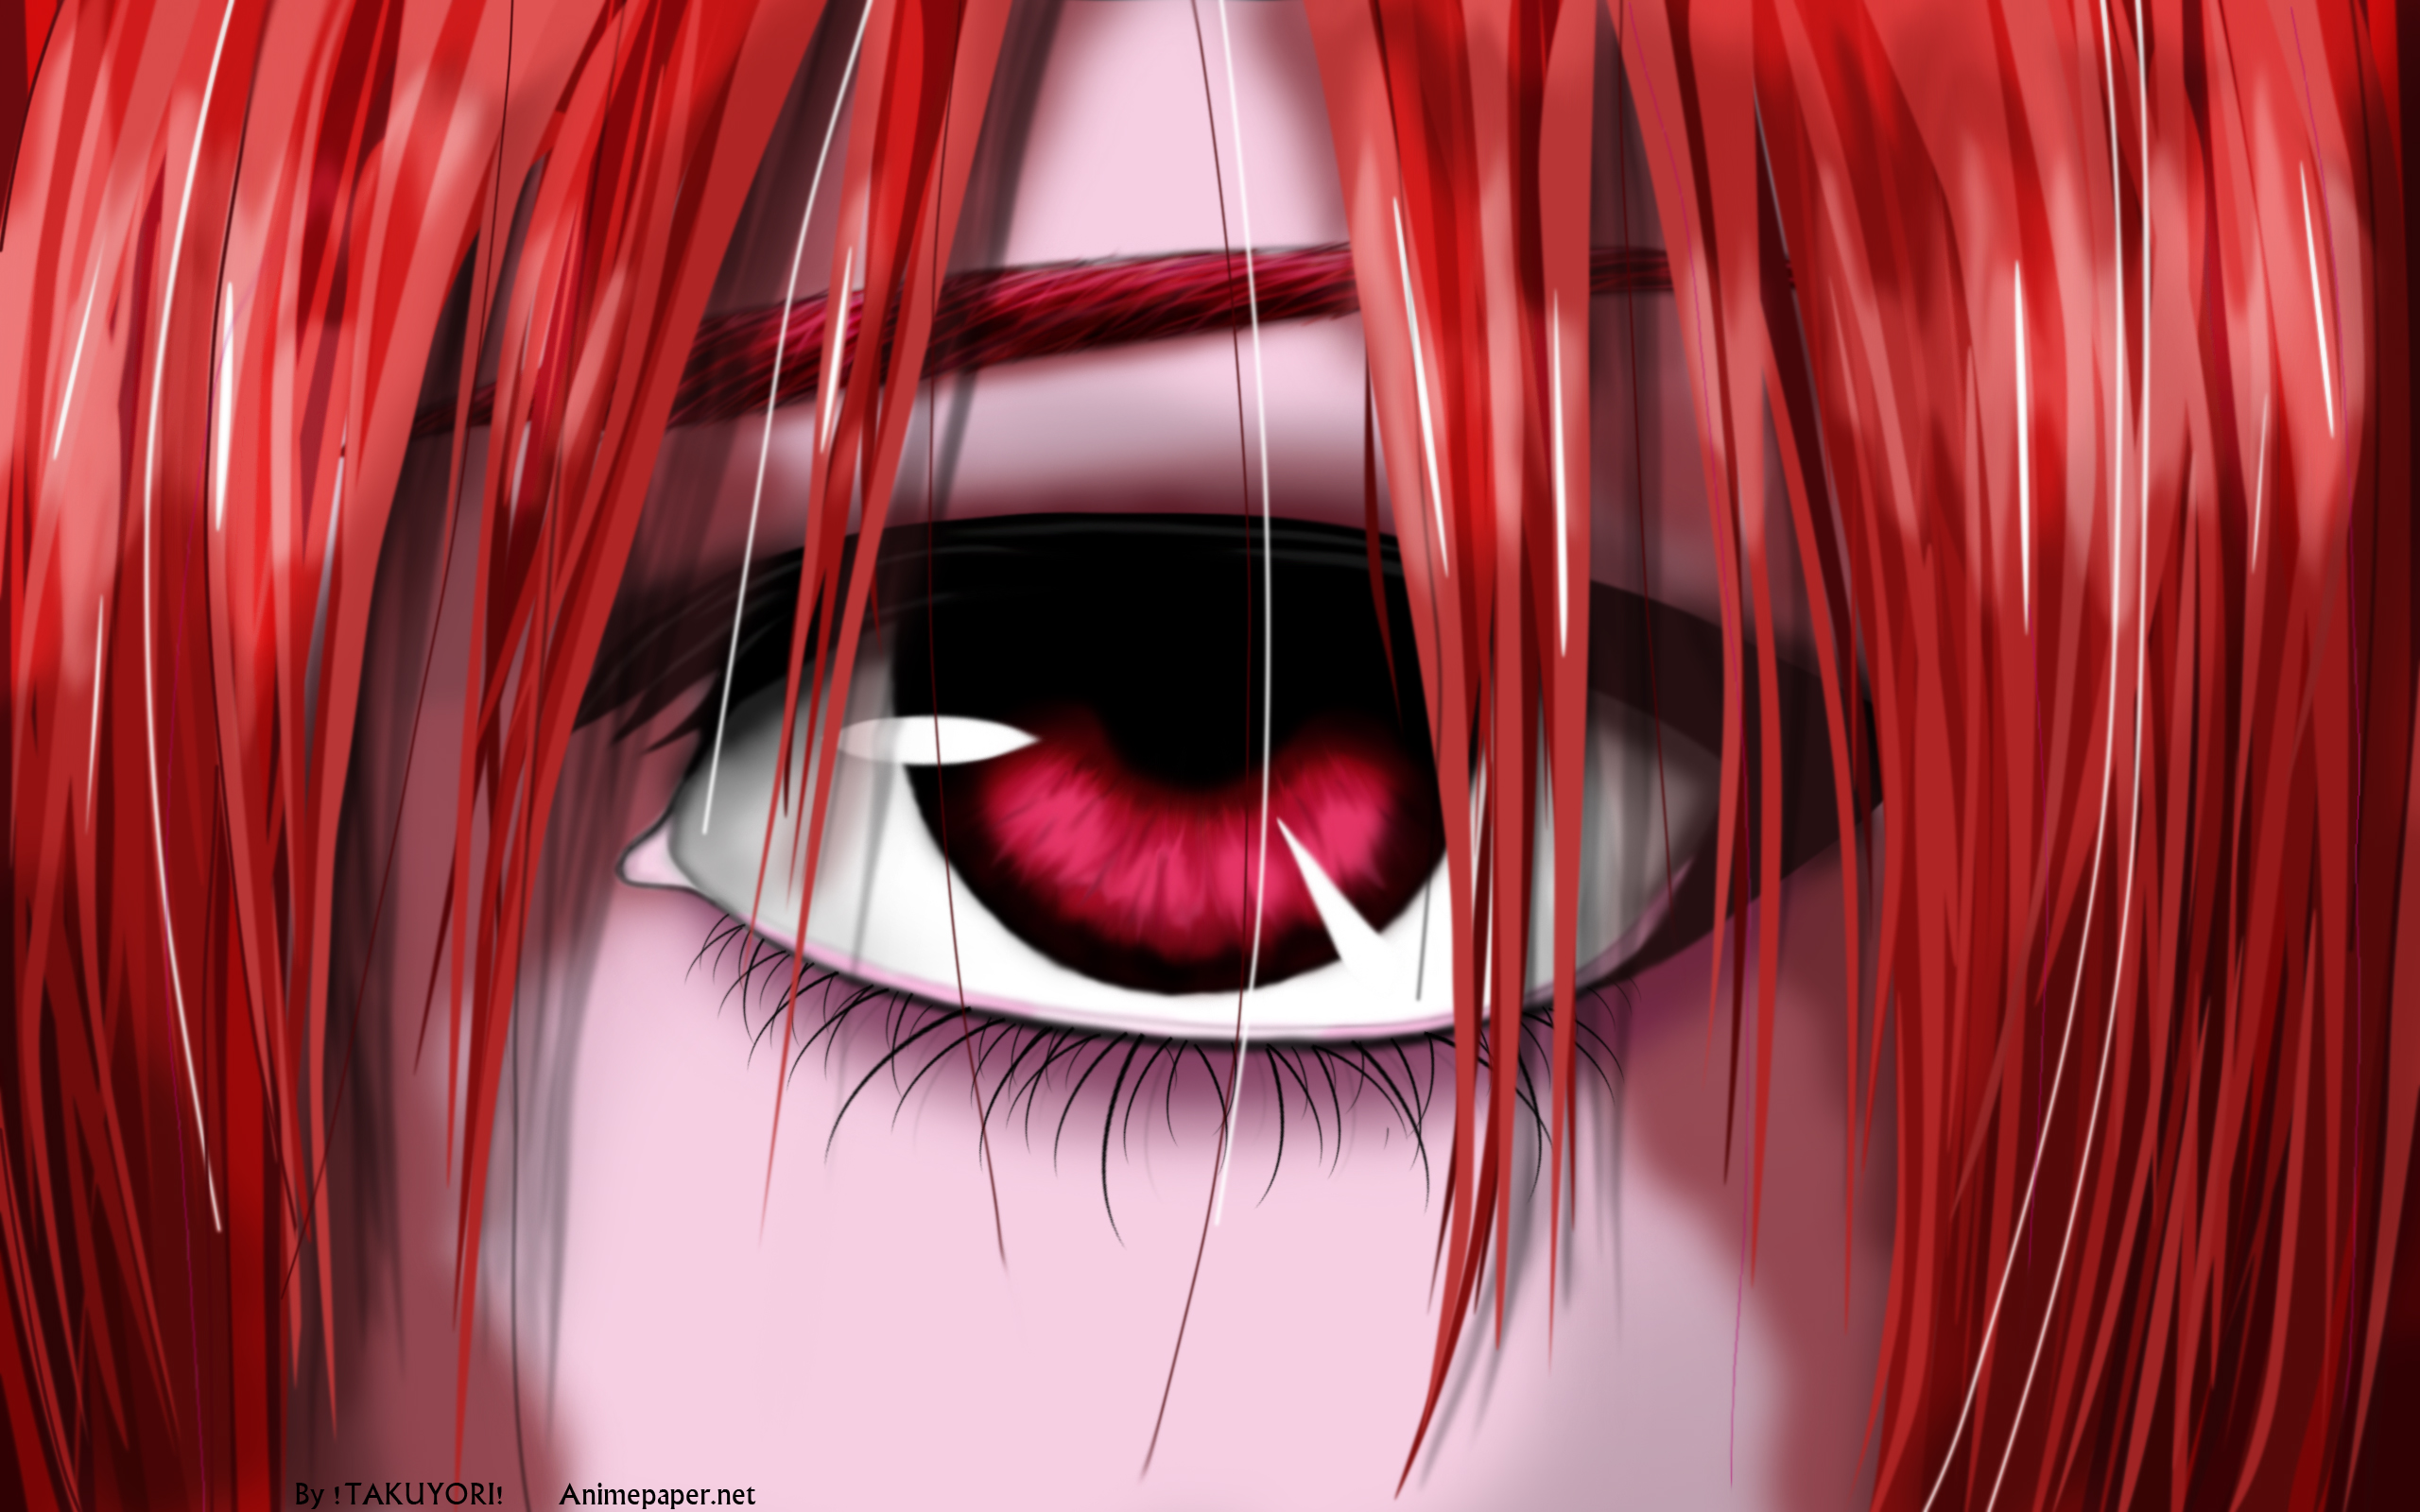 Anime character Lucy from Elfen Lied, captivating with her enigmatic beauty.